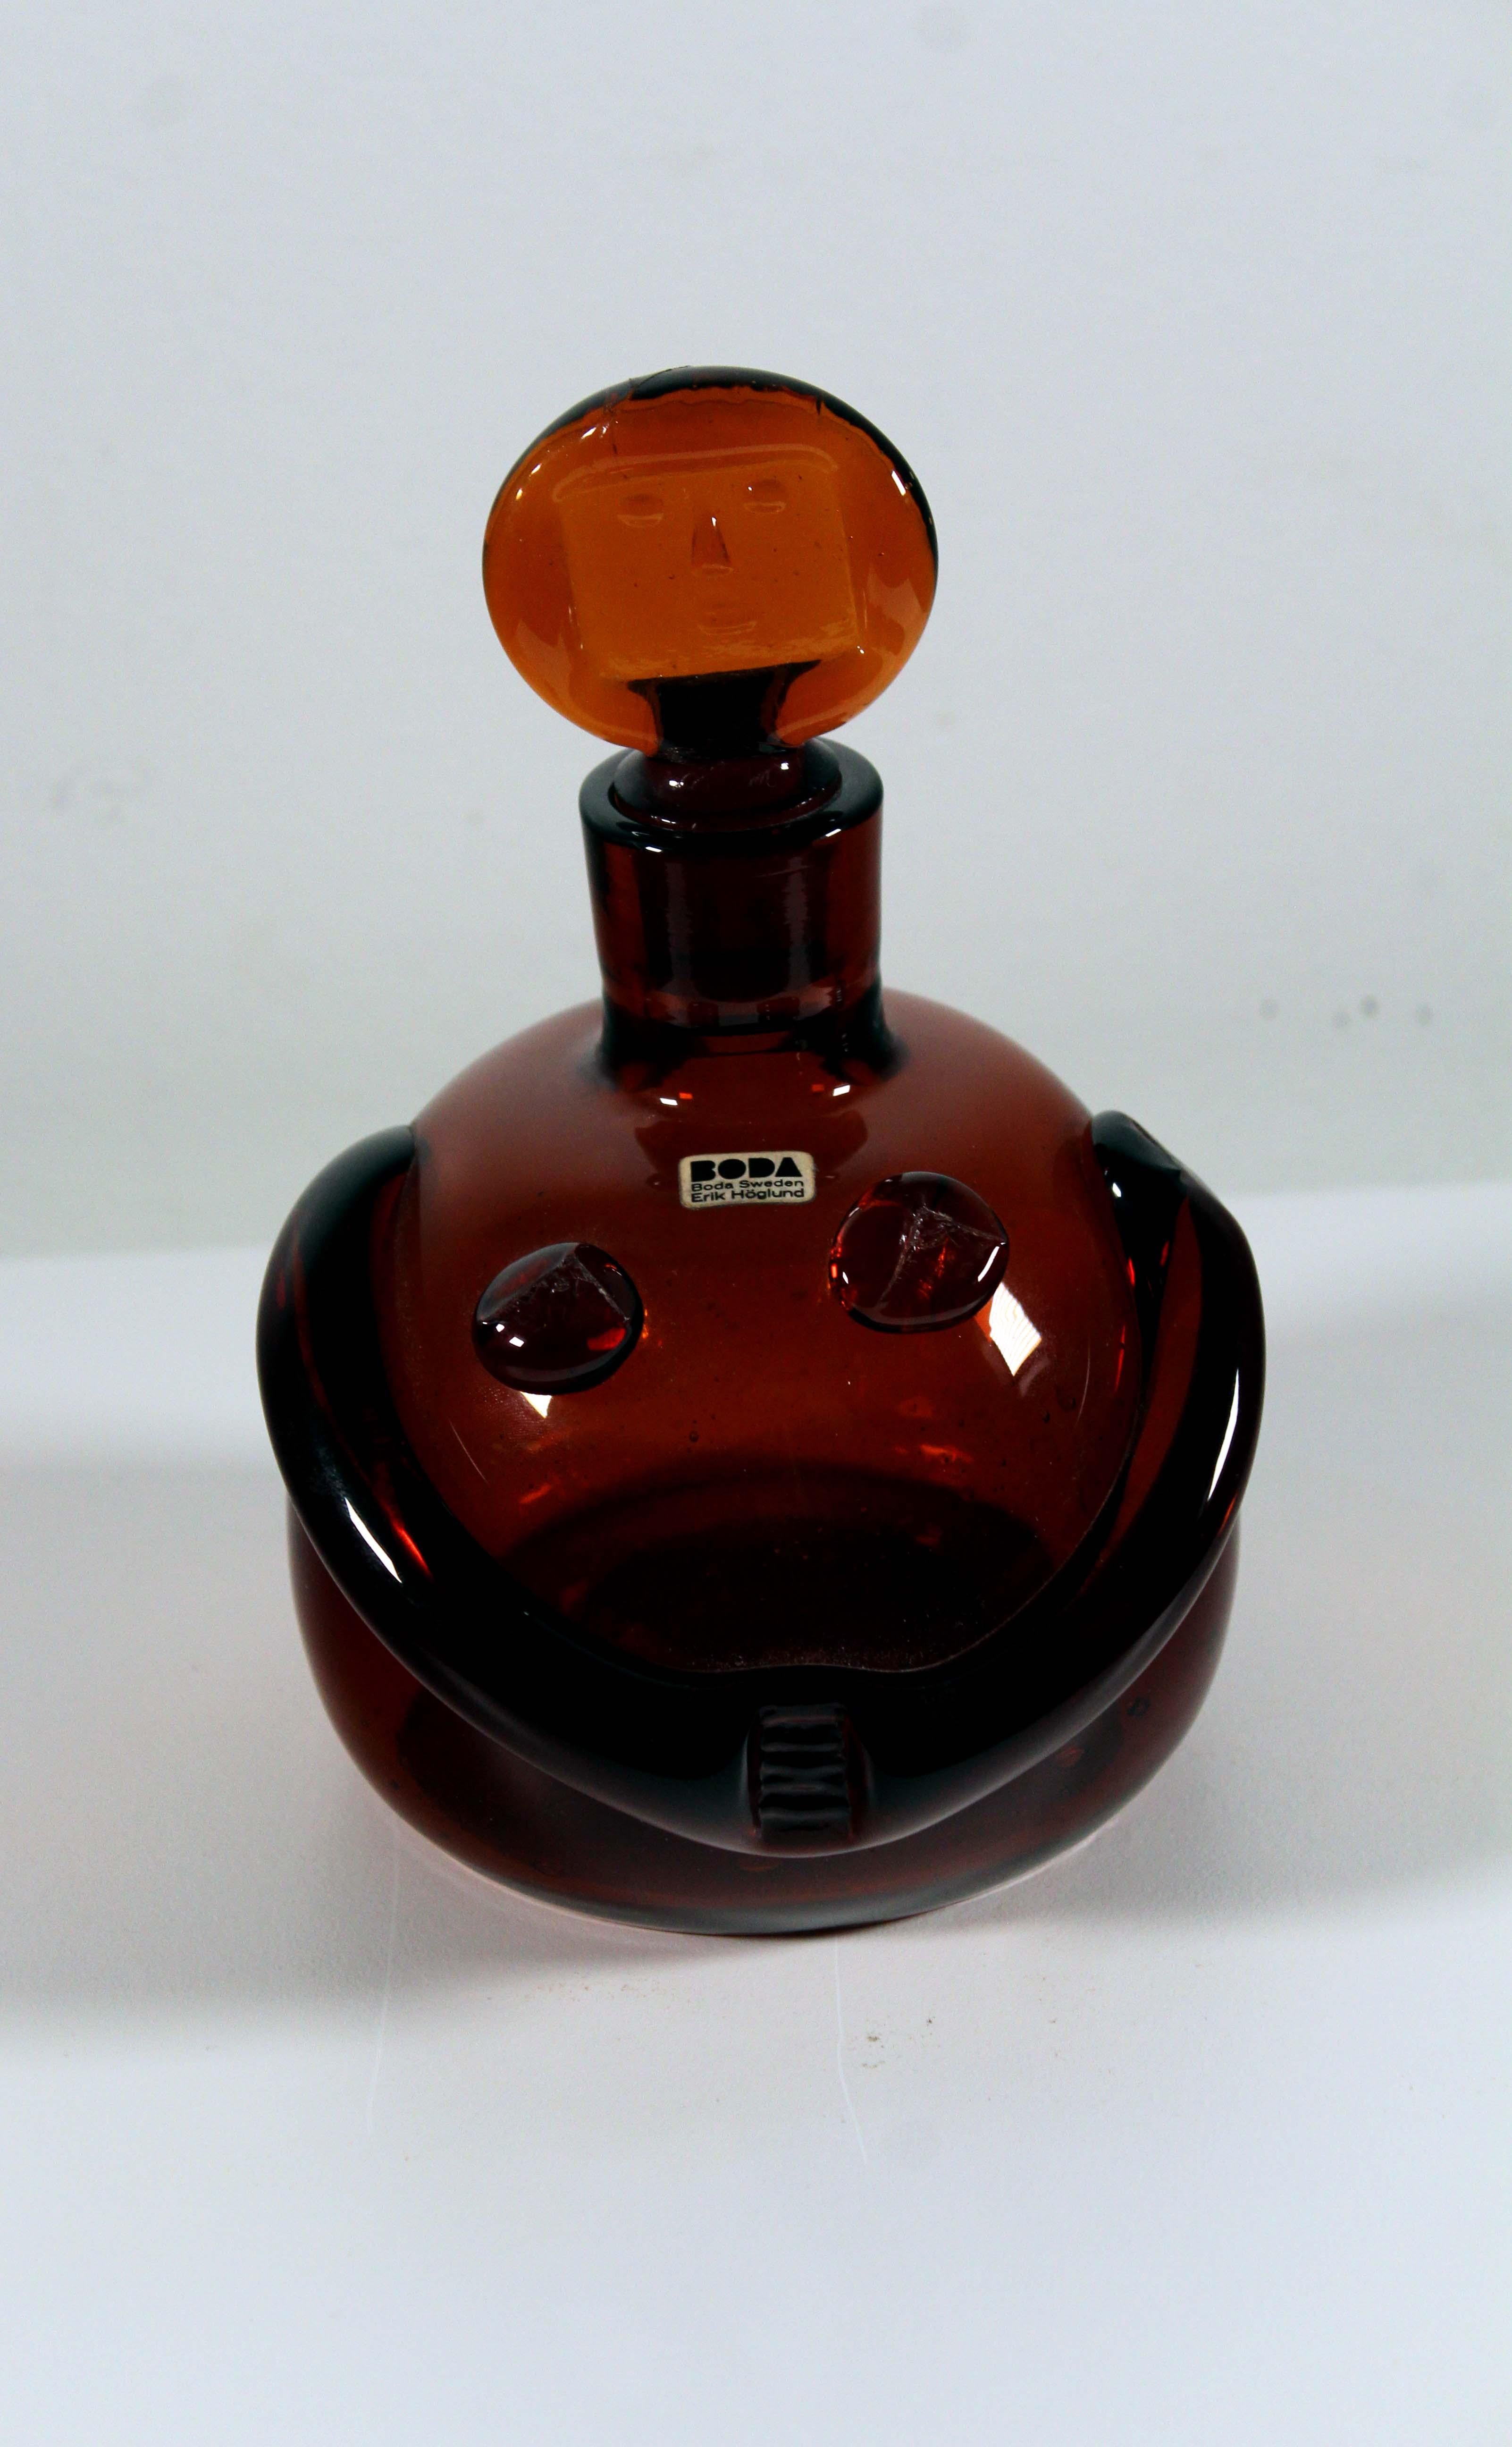 An iconic Mid-Century Modern orange glass decanter by Swedish artist Erik Hoglund. The lid of the bottle has his infamous female face design. With original Boda Sweden product tag. From a private collection. Dimensions: 6.5” height x 4.5” diameter